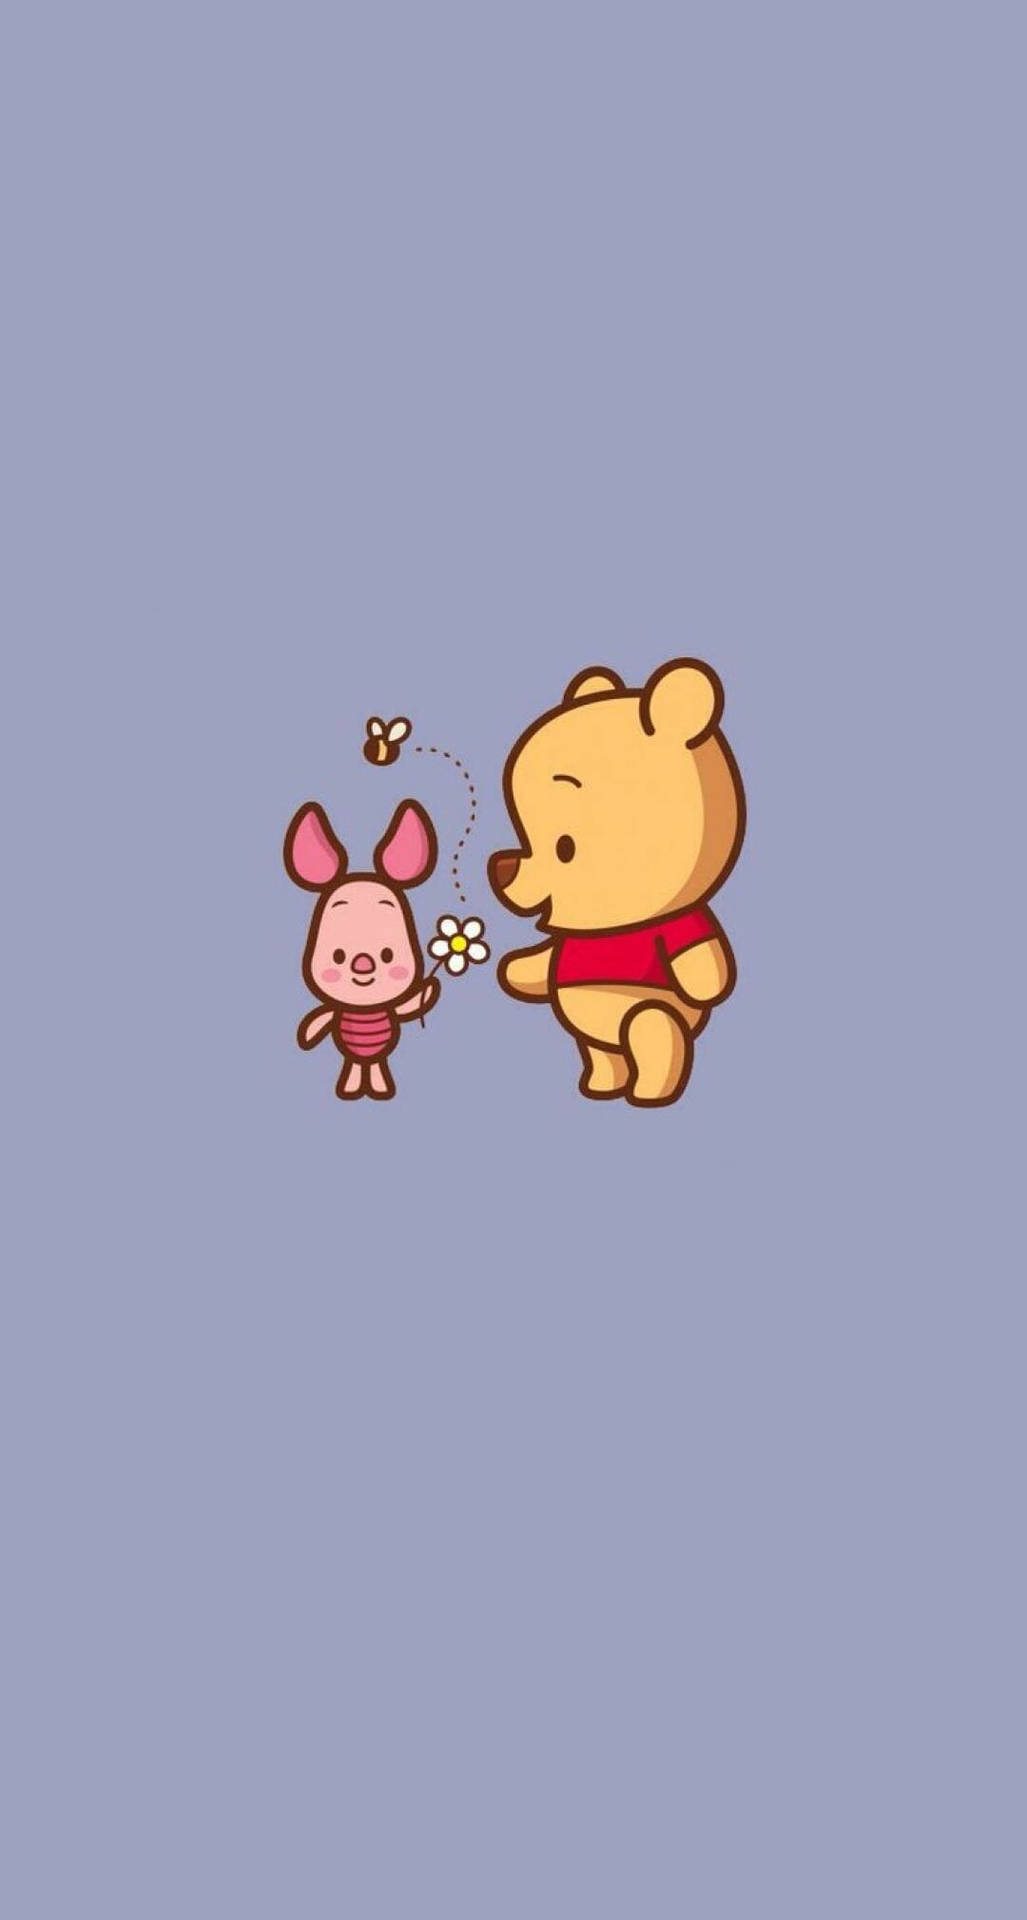 Pooh And Piglet Cute IPhone Wallpaper